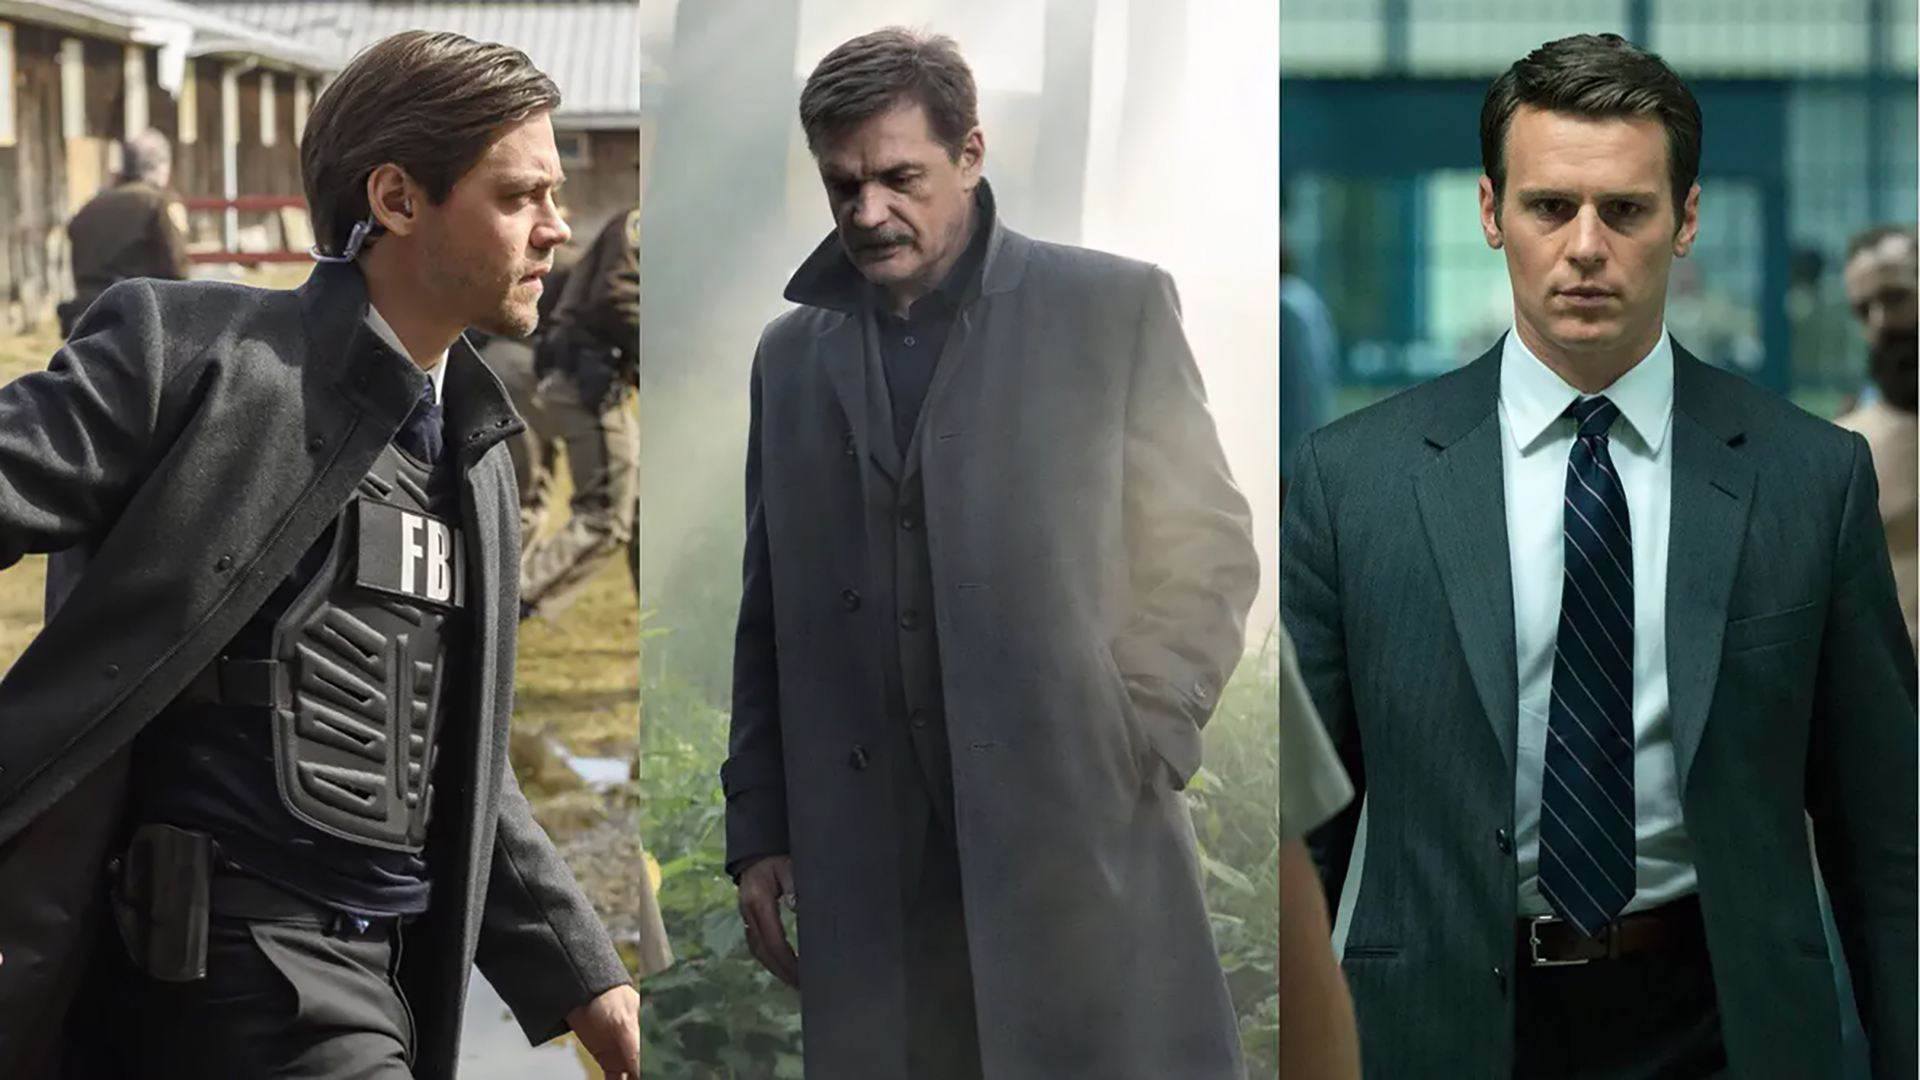 7 Crime Drama Series That Will Keep You On The Edge of Your Seat The Whole Time